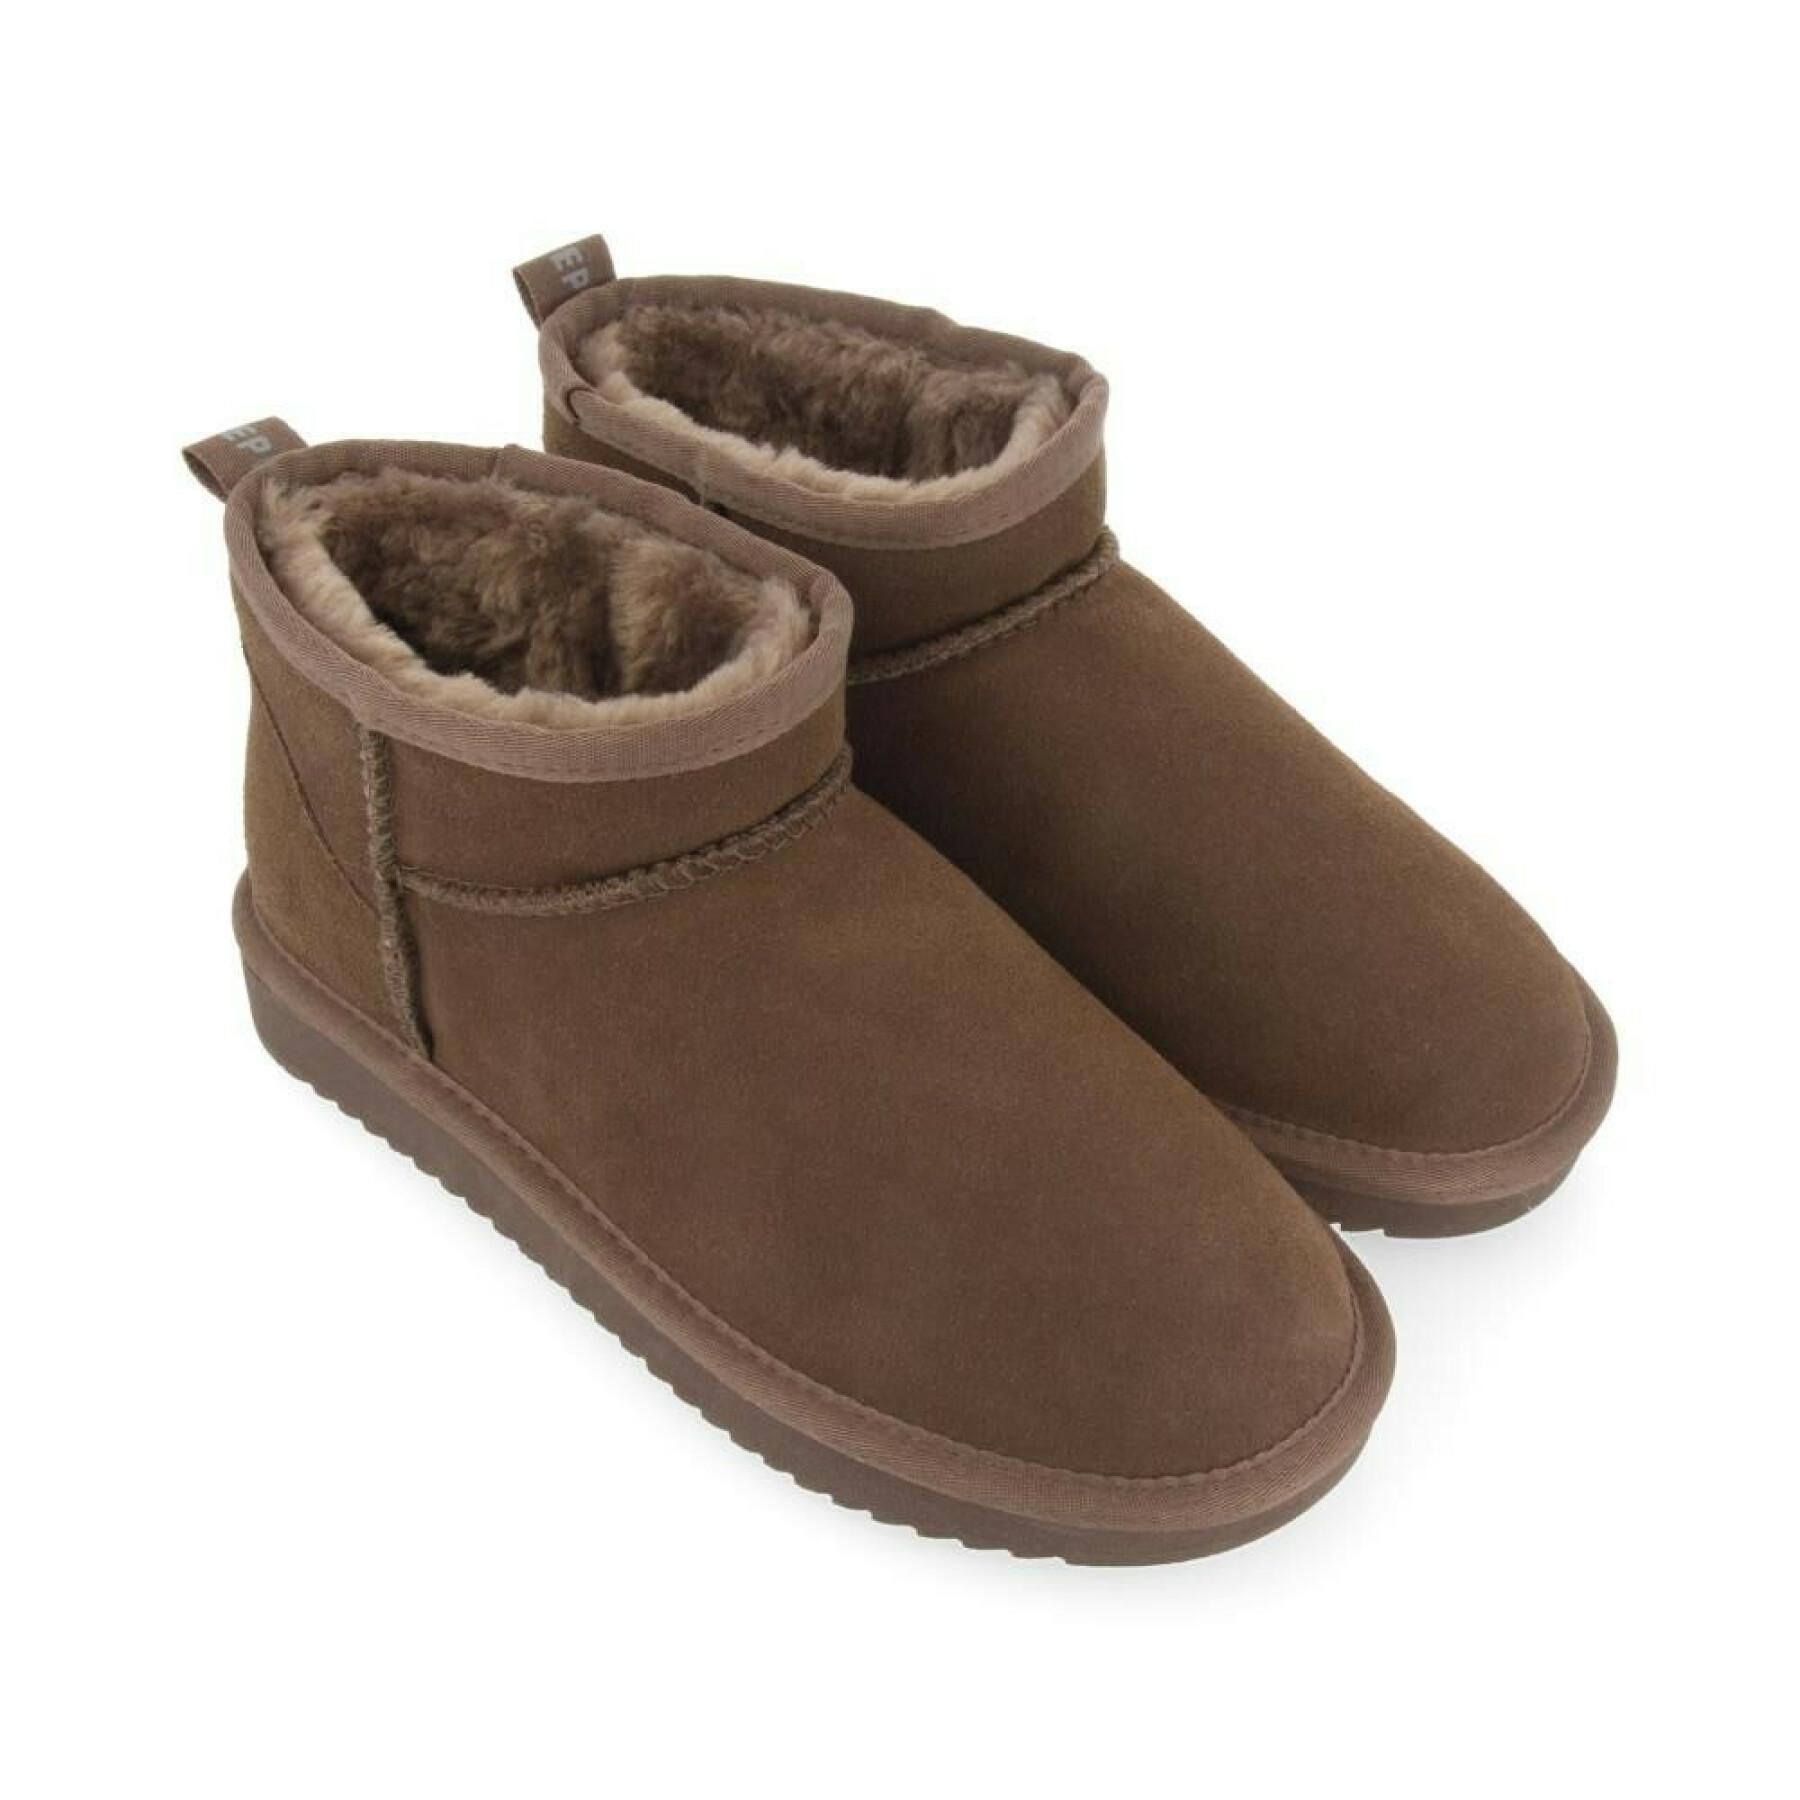 Low boots for women Gioseppo d'hivers marrons